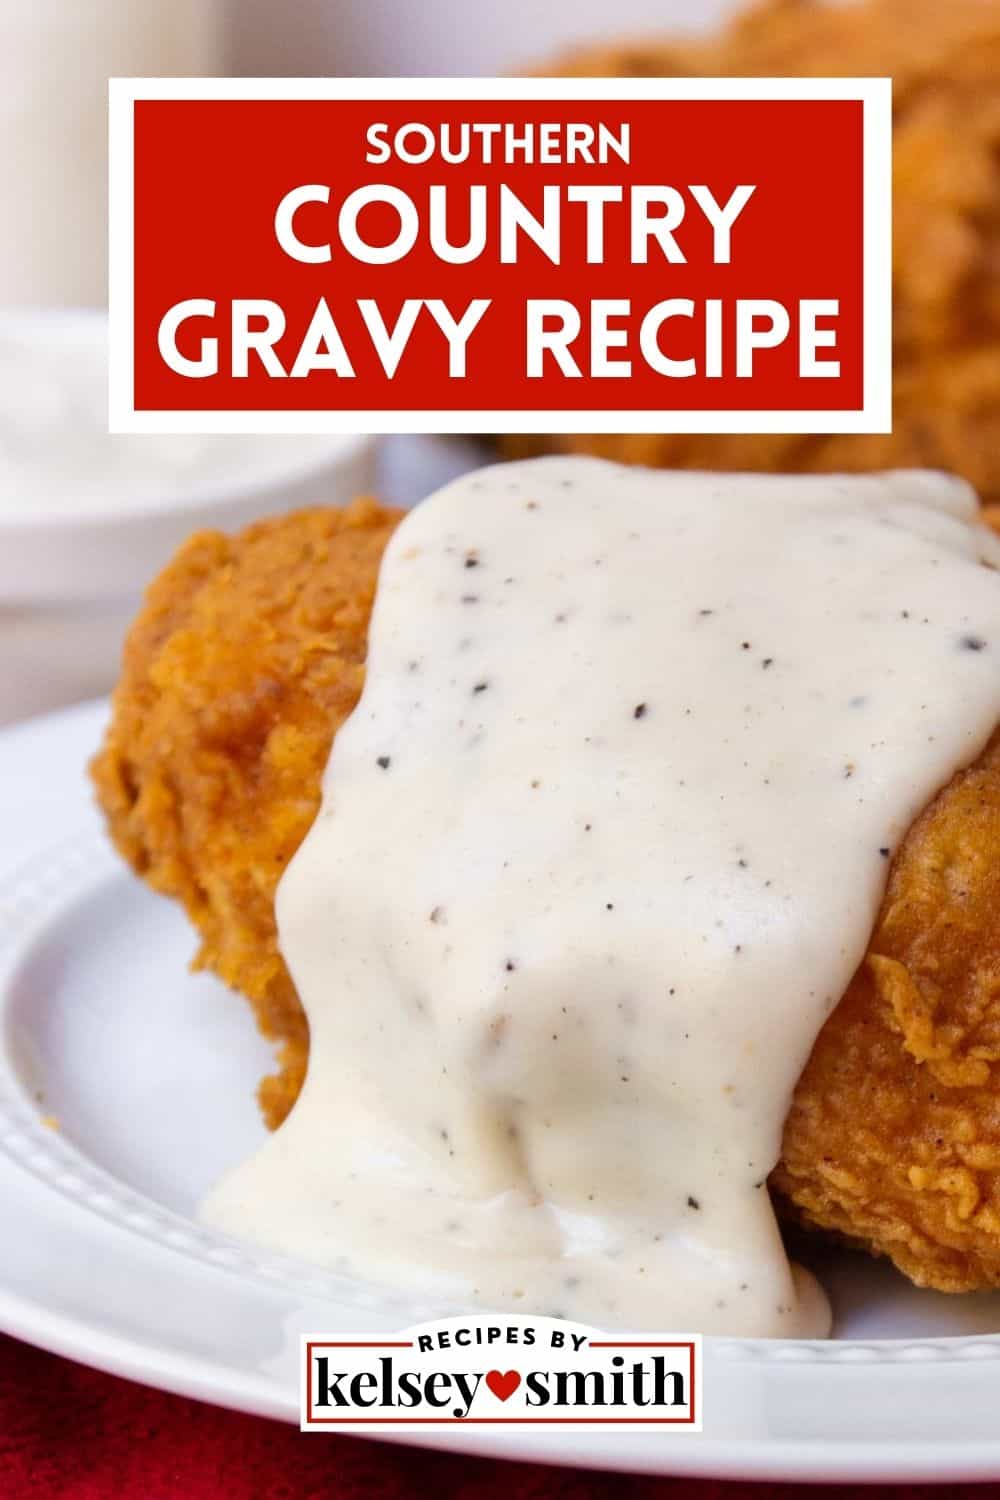 Southern country gravy over fried chicken